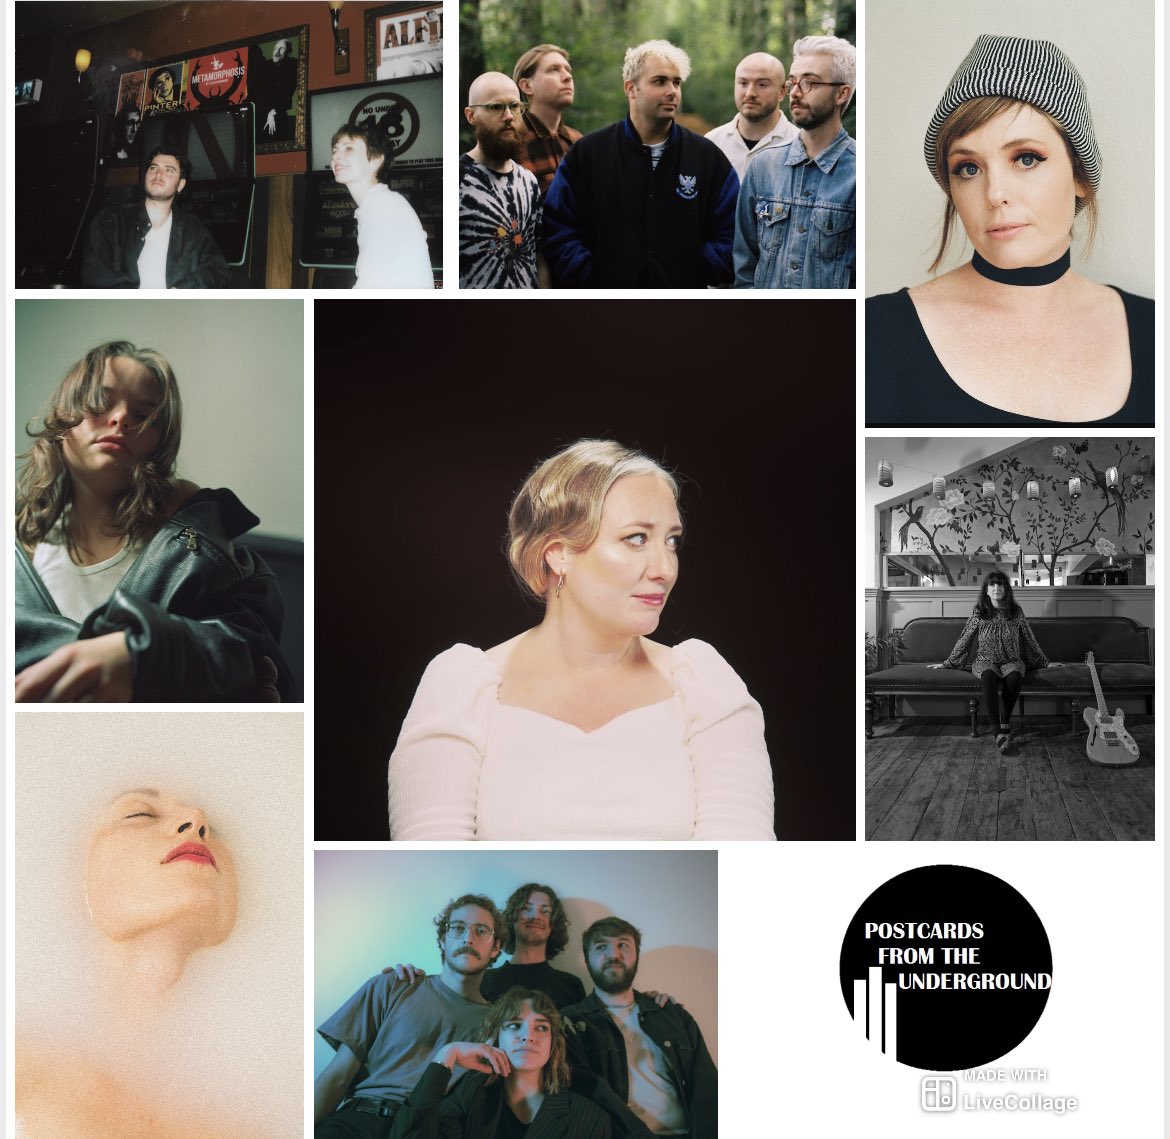 Latest PFTU dropping Sunday 8pm @CumbernauldFm & Monday 2pm in US on @indiexfm Up this week @CaraghMusic is in session Plus new music from @mumbletide @_savagemansion Haley @evjanderson @plantoidworld @gillie_music Epona @CaraghMusic